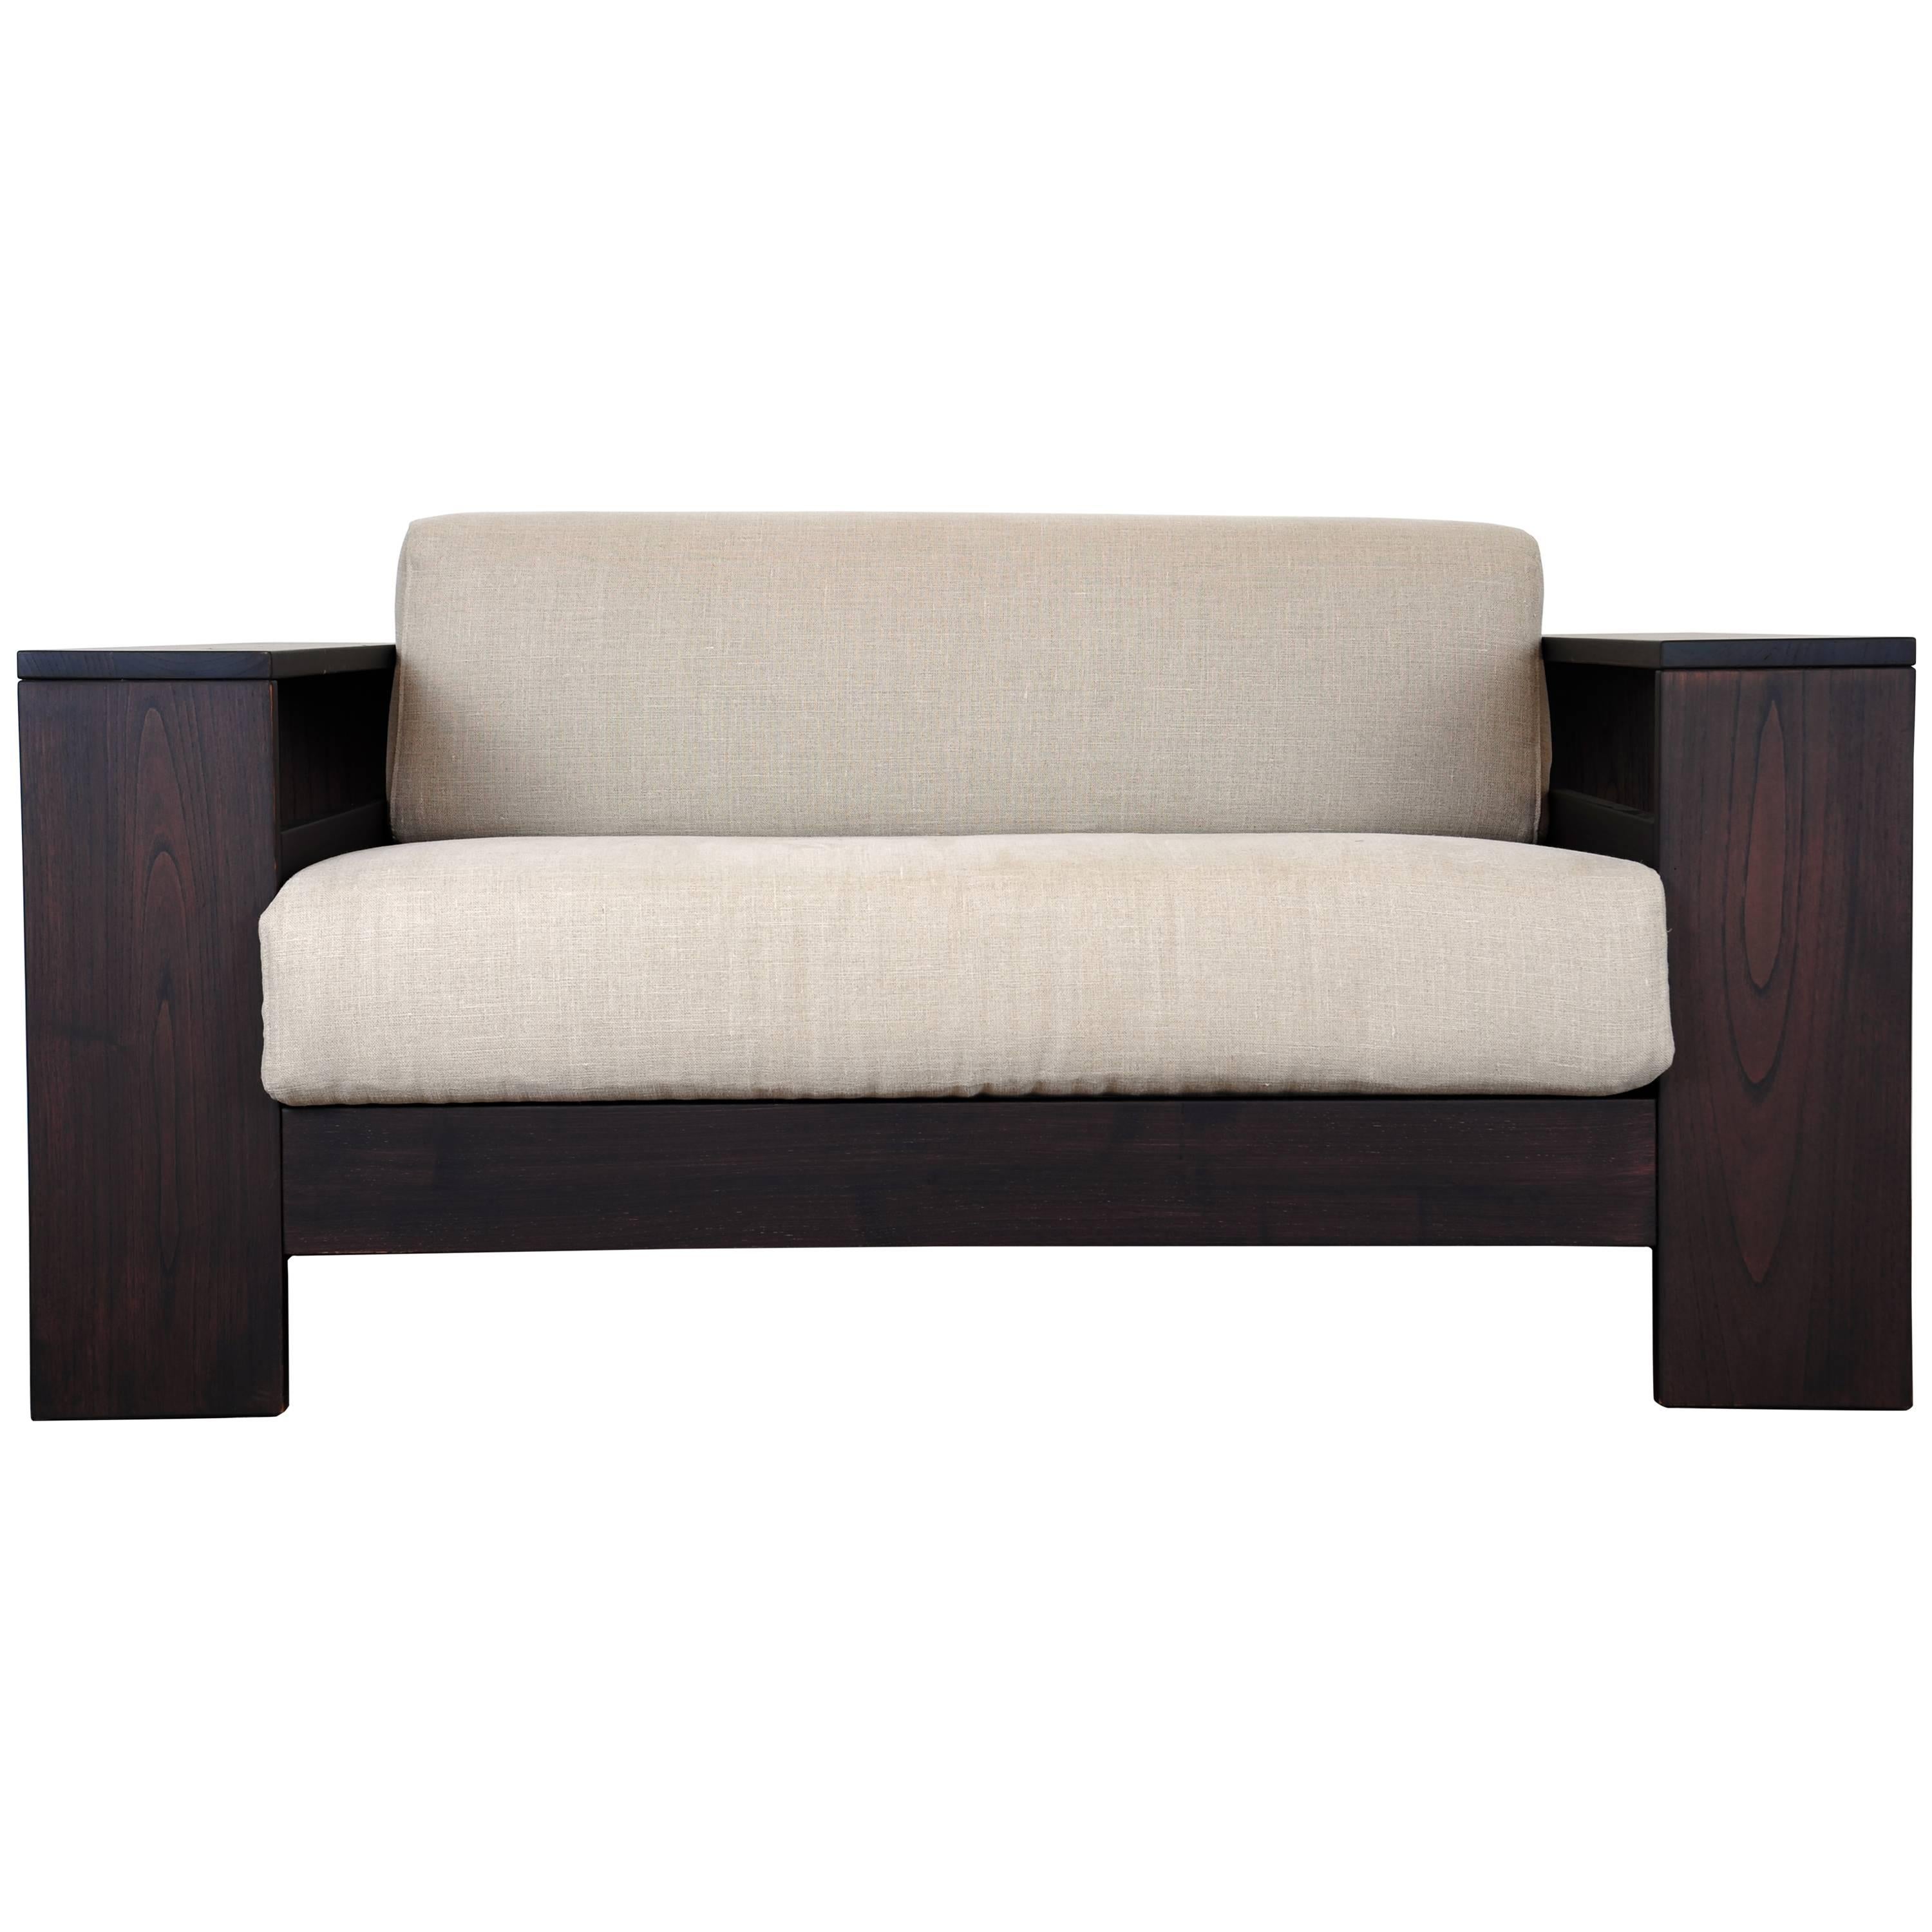 Modern Solid Chestnut Wood Sofa by Michelangeli, Italy For Sale